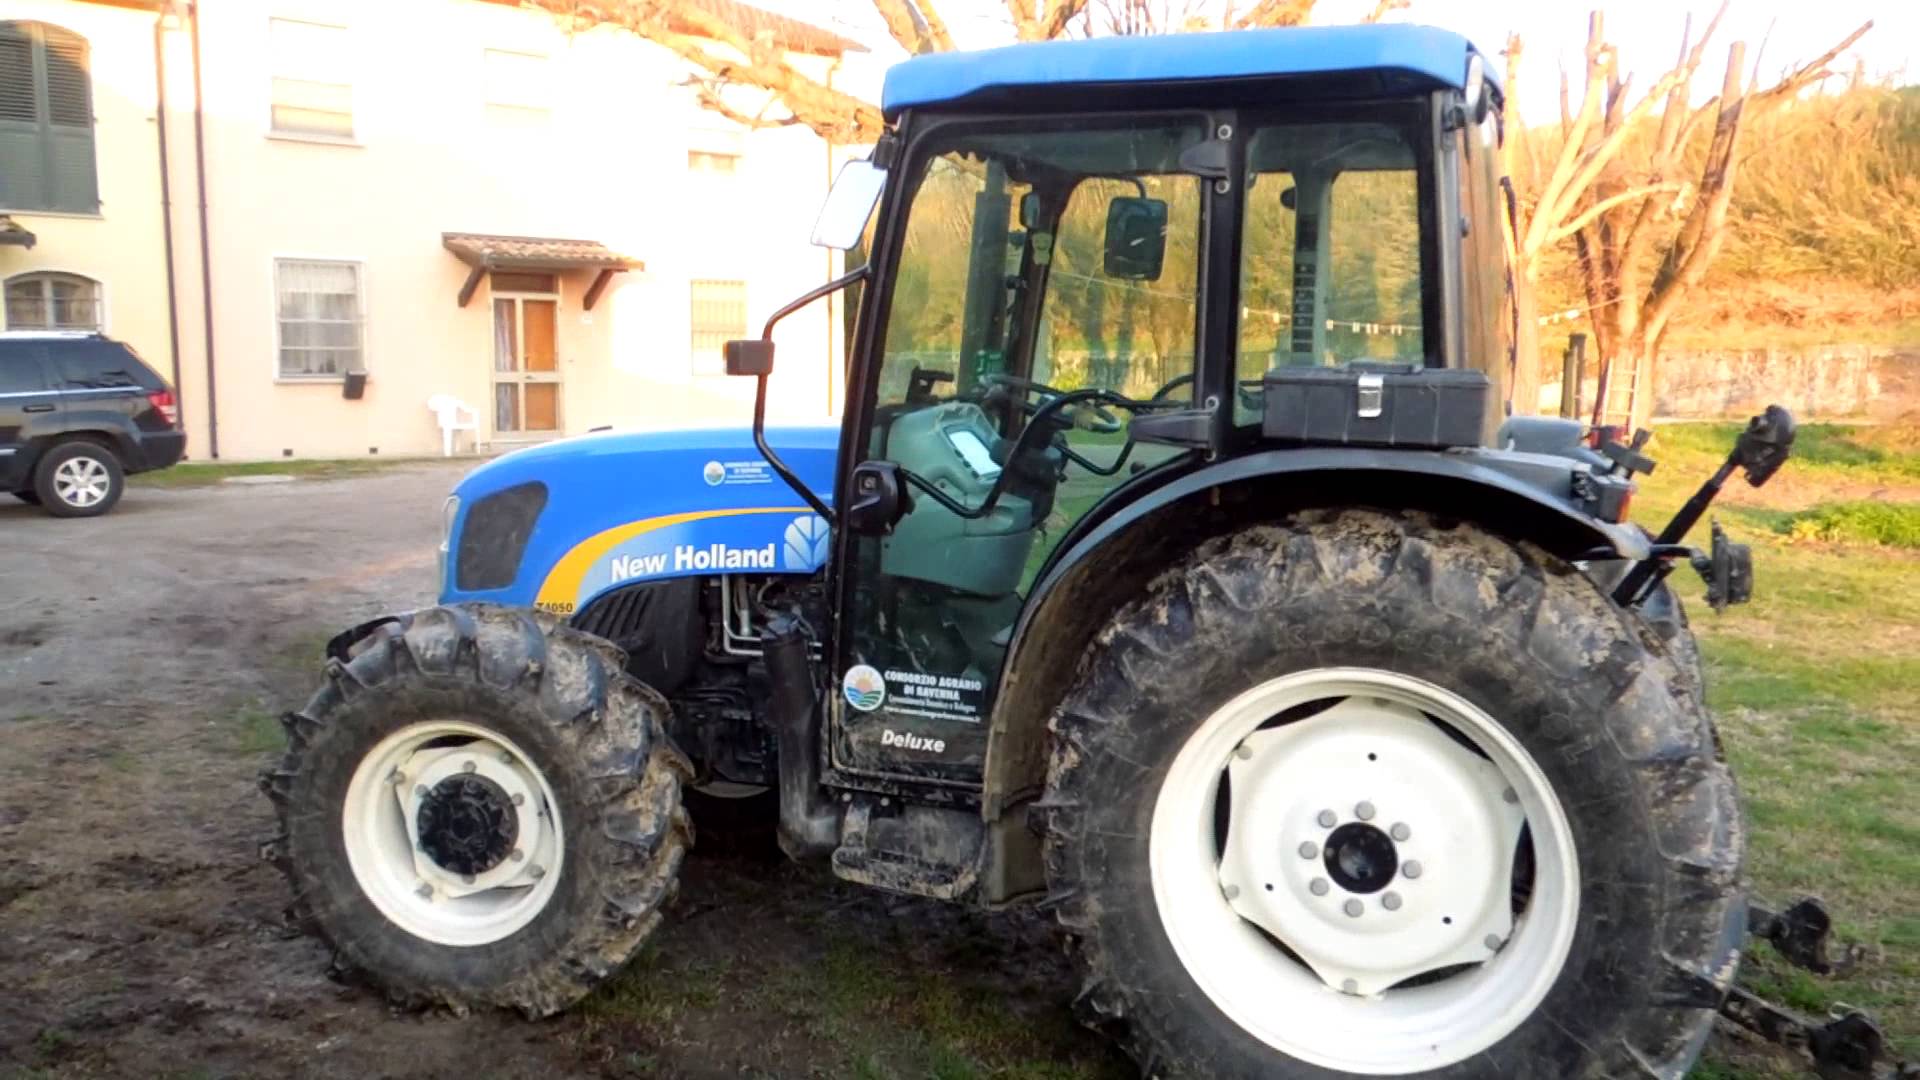 RISCALDAMENTO NEW HOLLAND T4050 DELUXE - YouTube